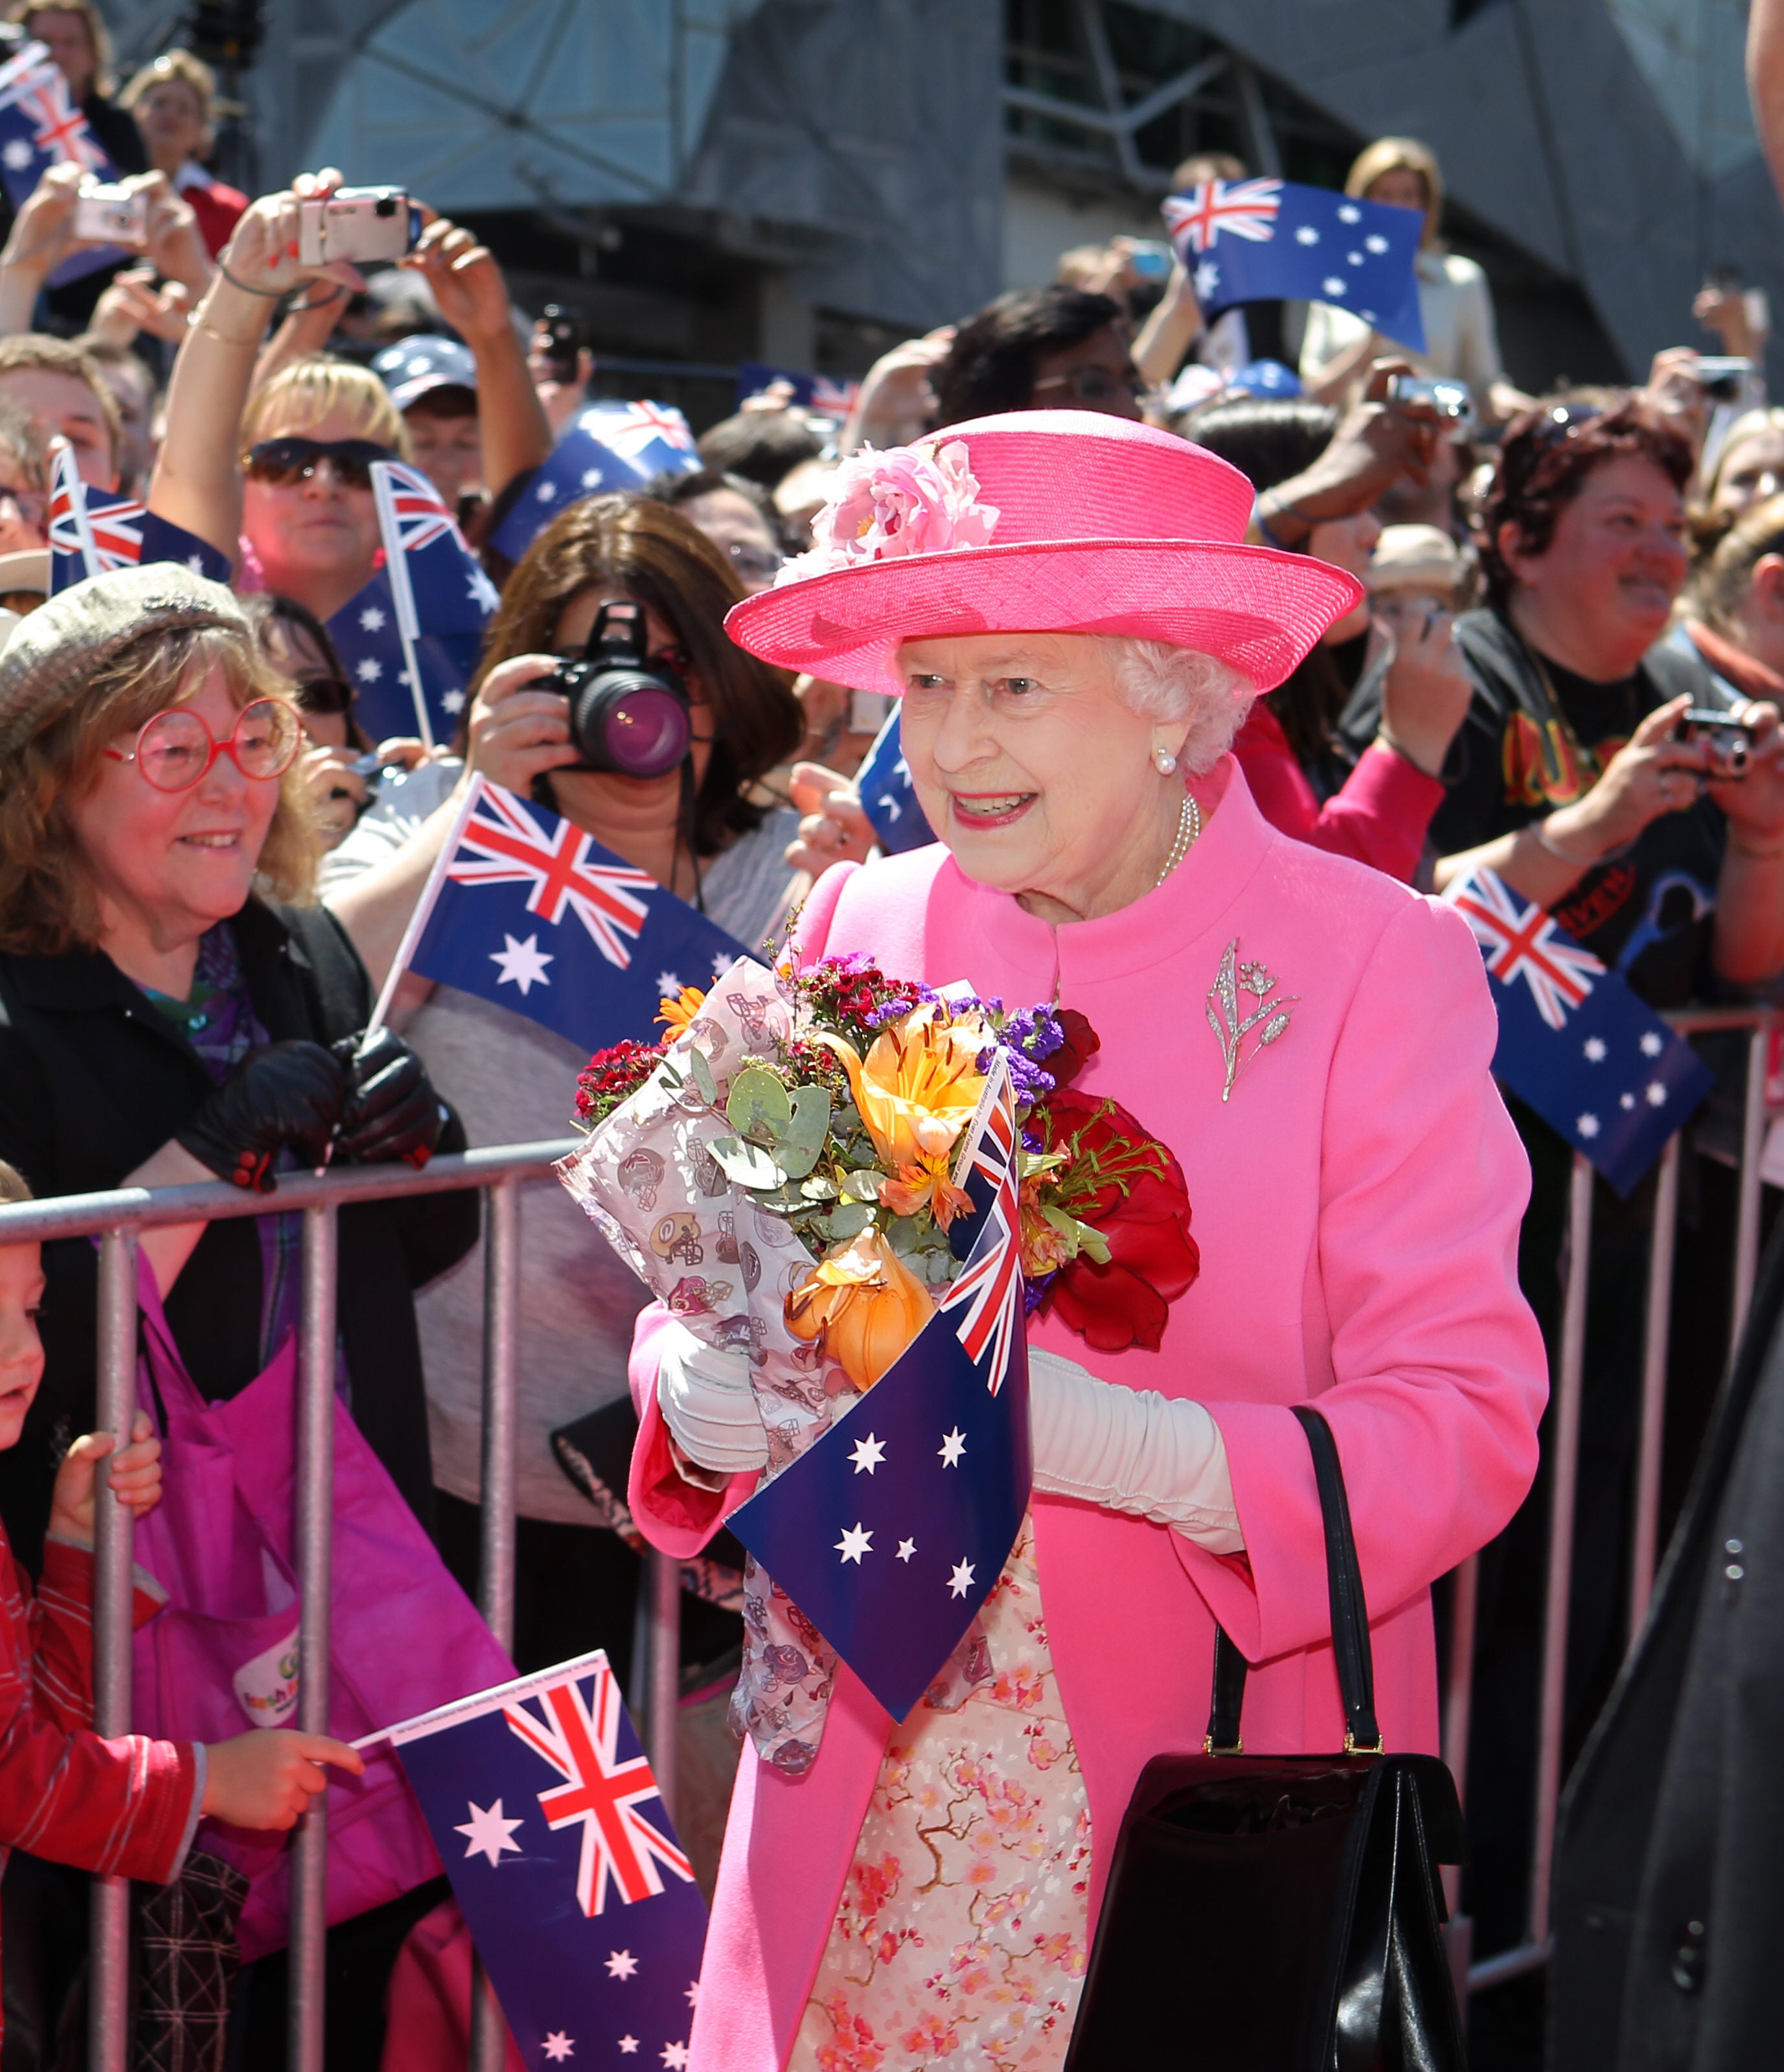 Queen Elizabeth II receives flowers from the crowd during her visit to Federation Square in downtown Melbourne, 2011